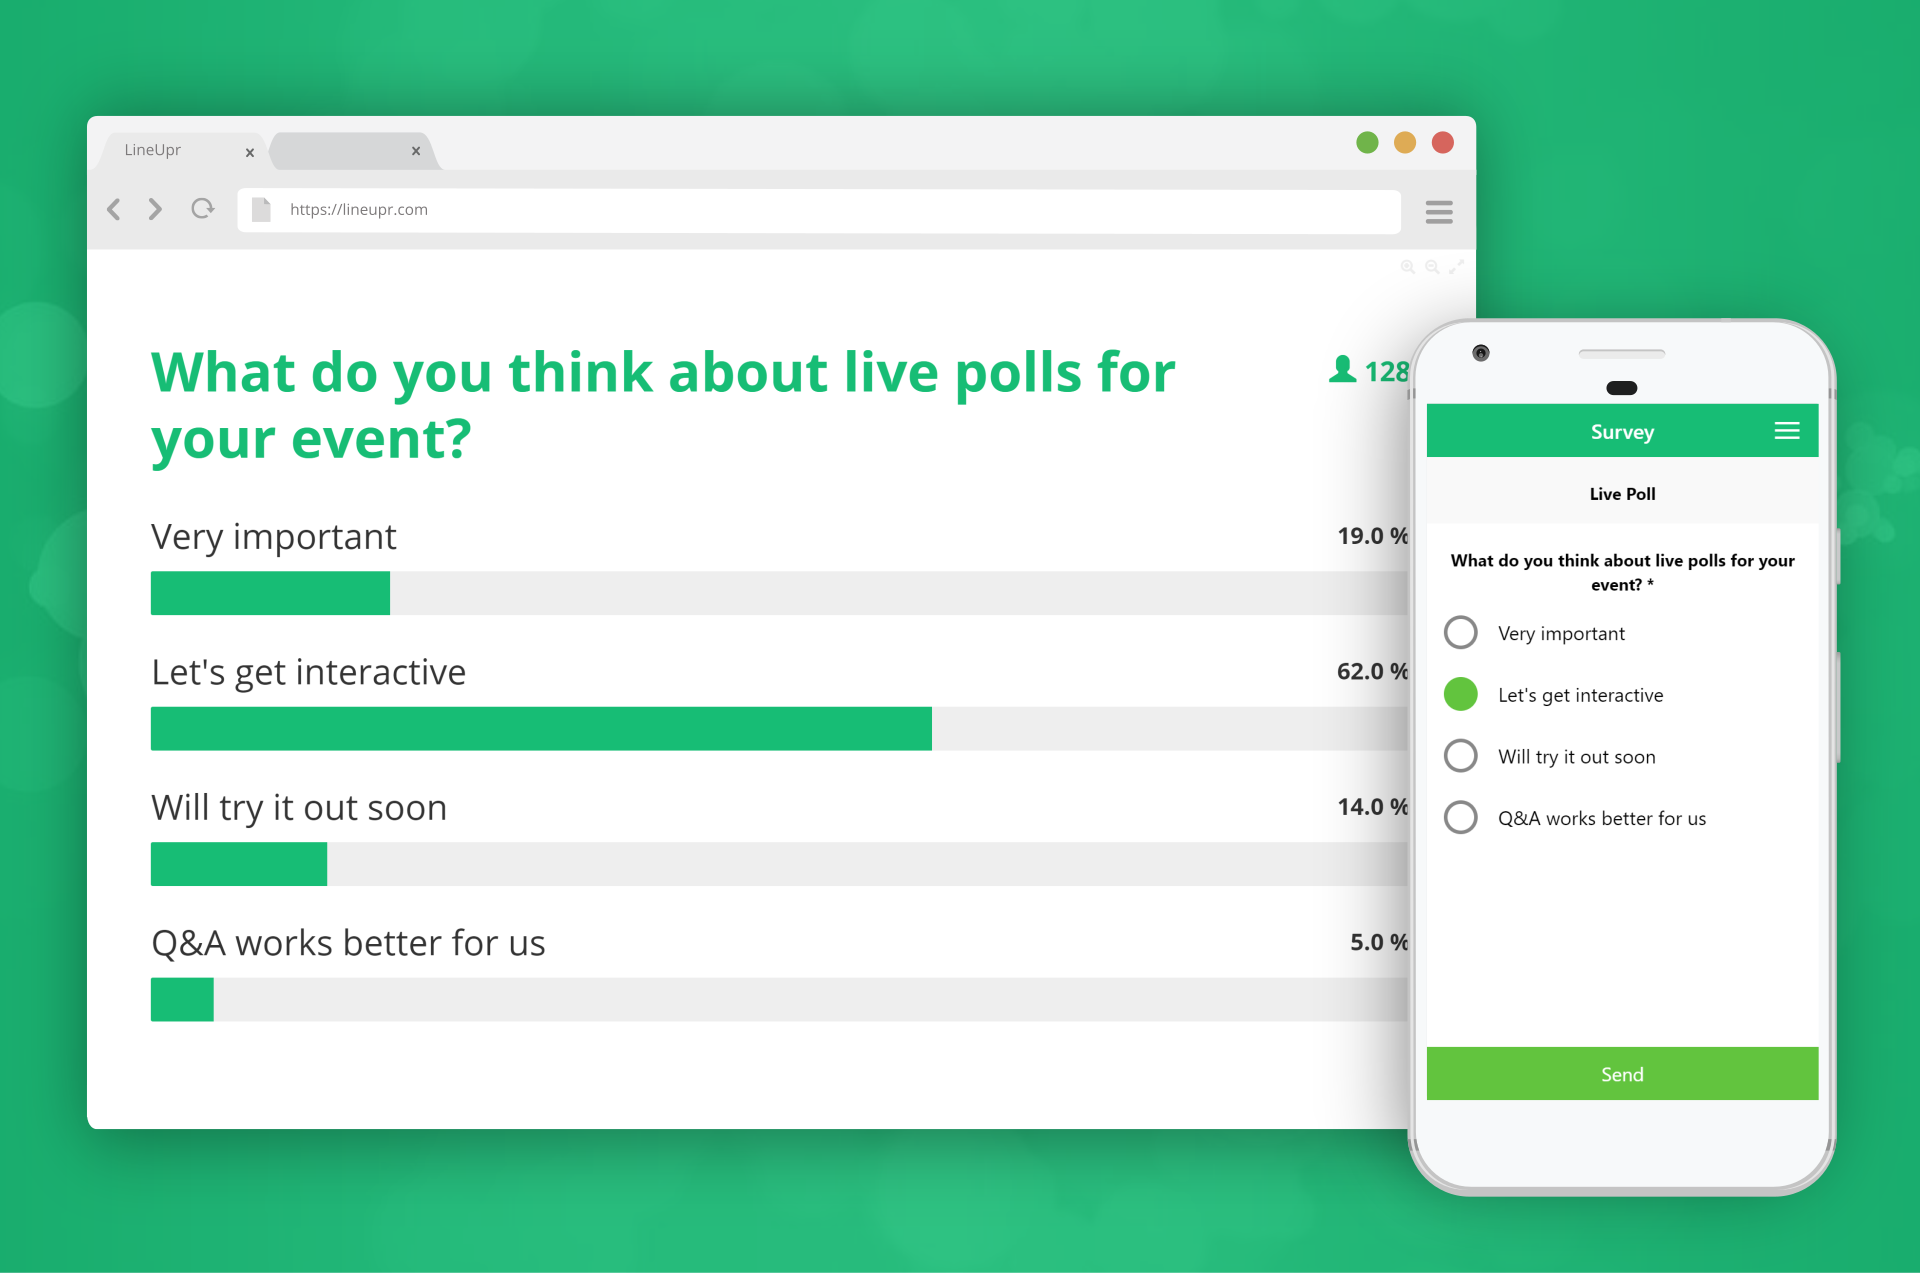 Use our survey feature to engage your guests. Create live polls or Q&A sessions to give your participants a voice during an event and gain valuable feedback.